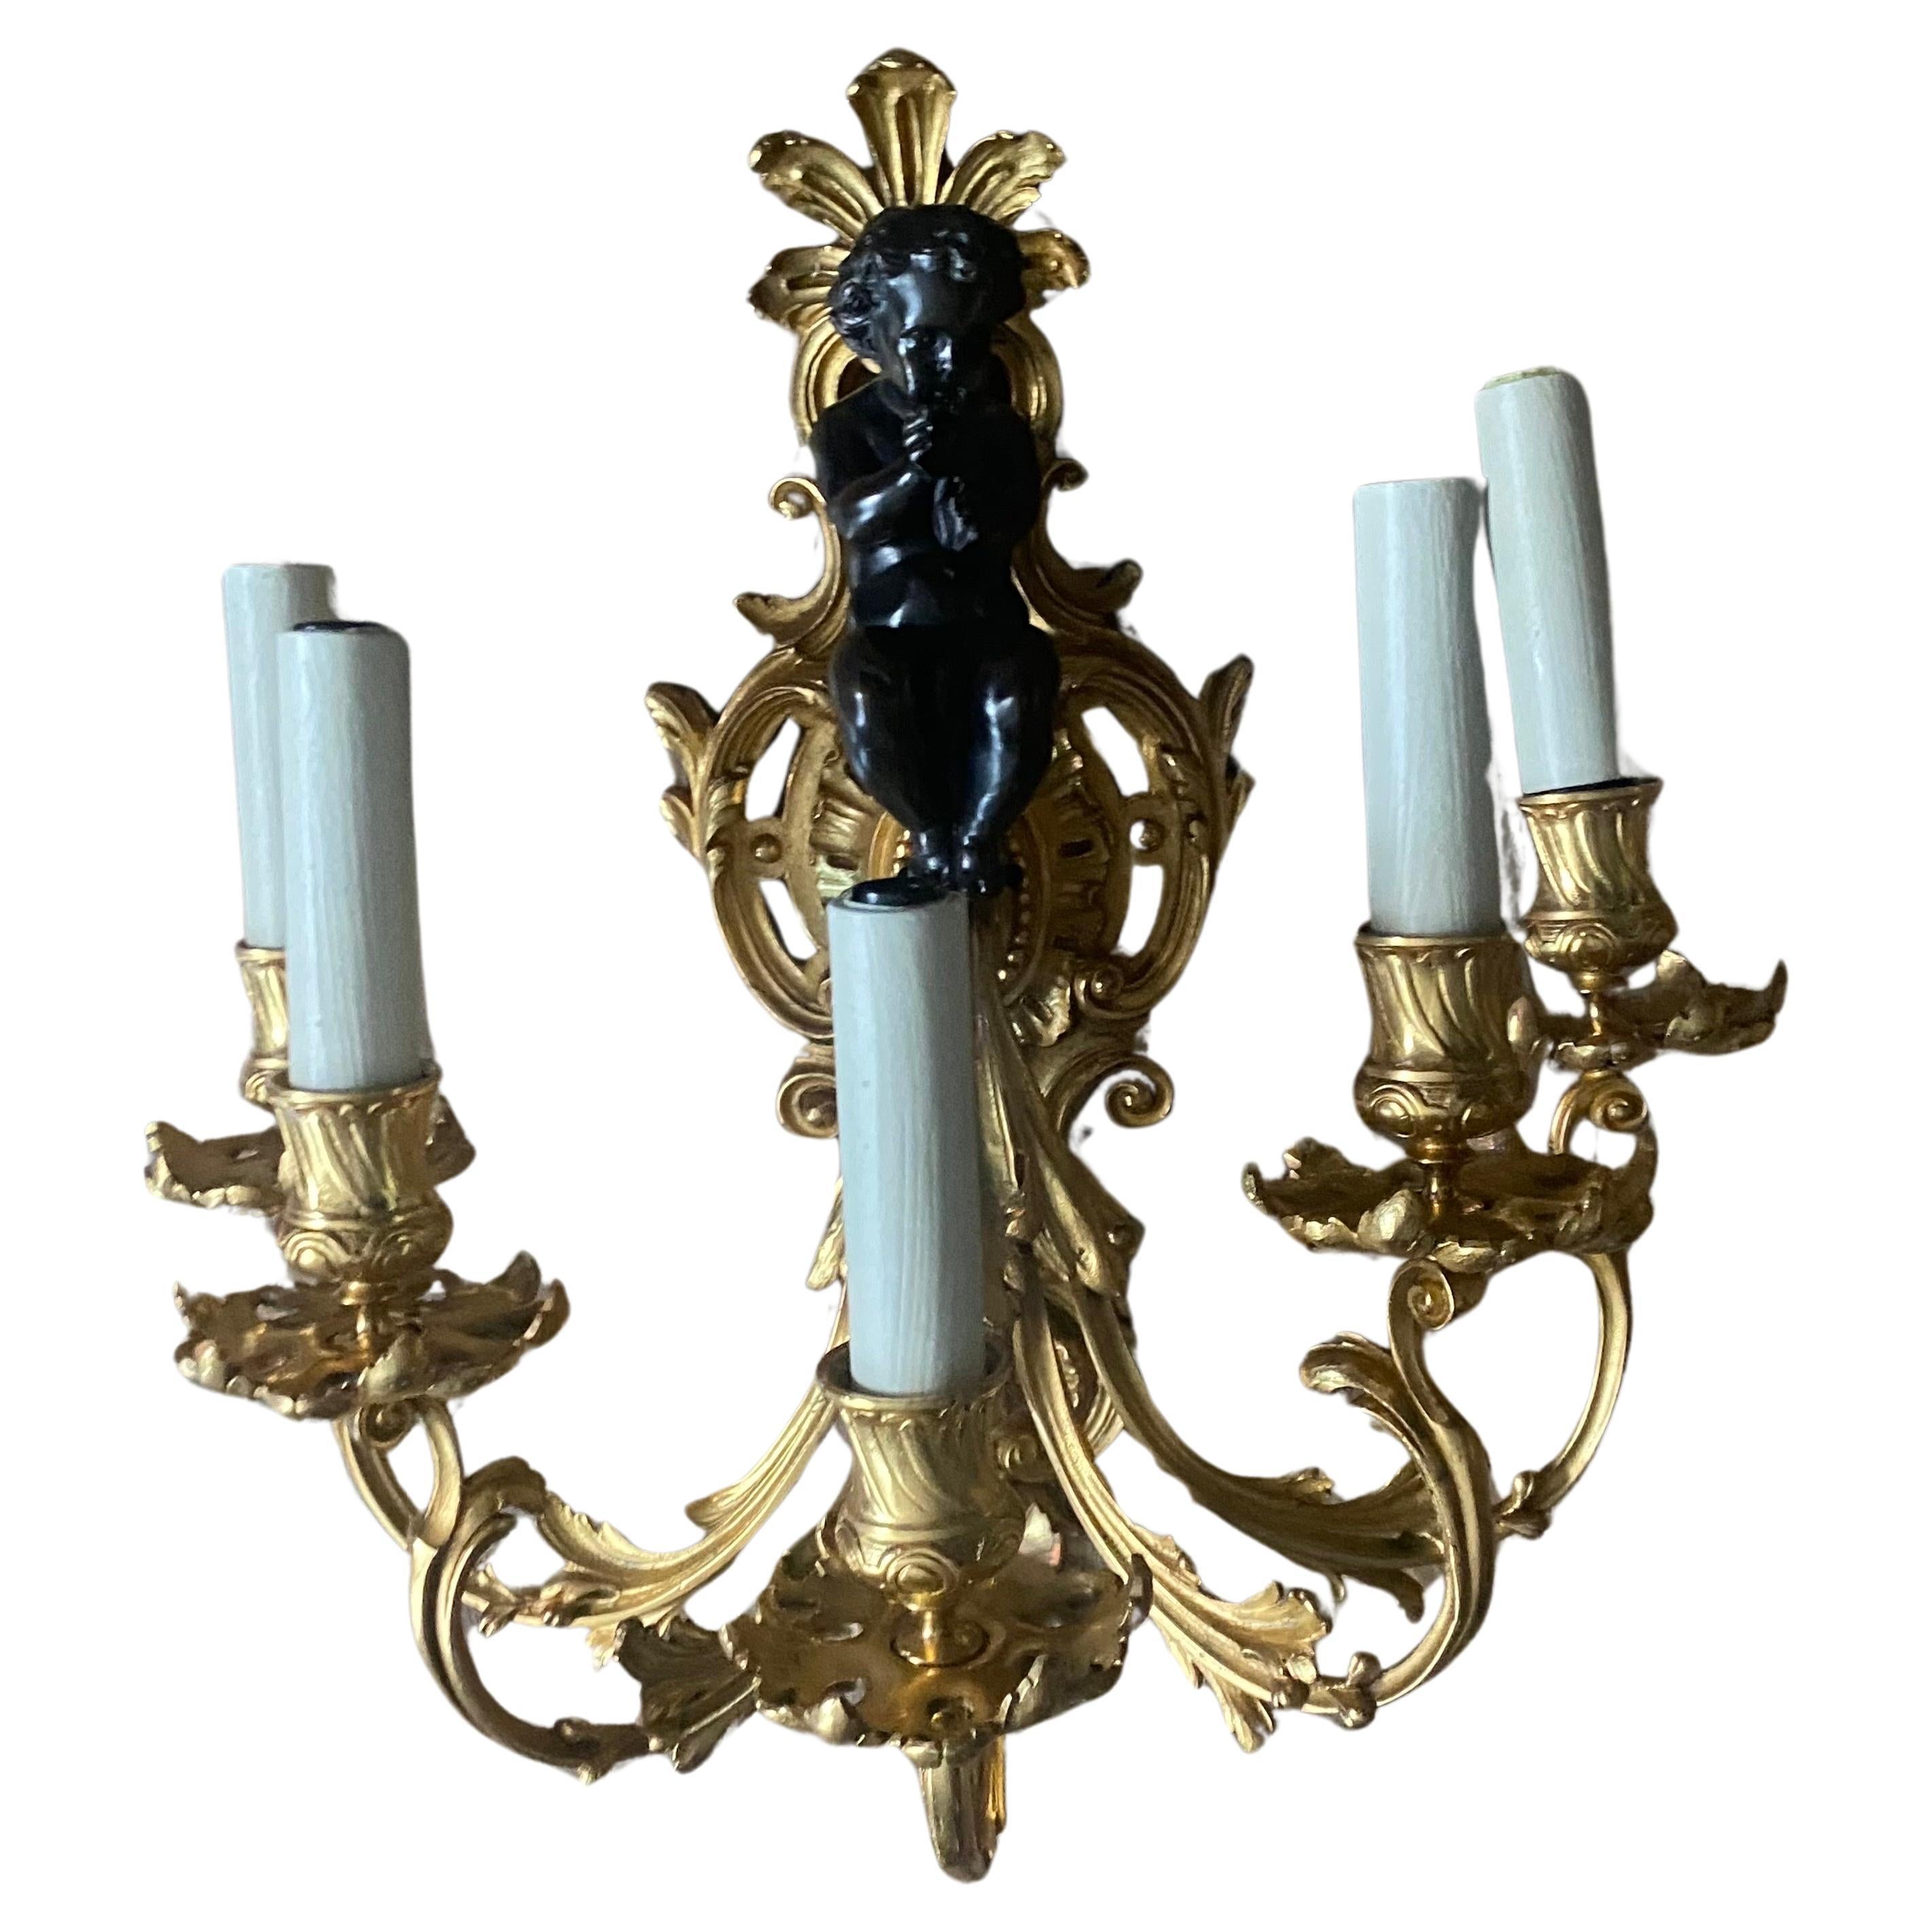 A Large Pair of 19th Century French Gilt Bronze Dore Cherub Wall Sconces In Excellent Condition For Sale In London, GB